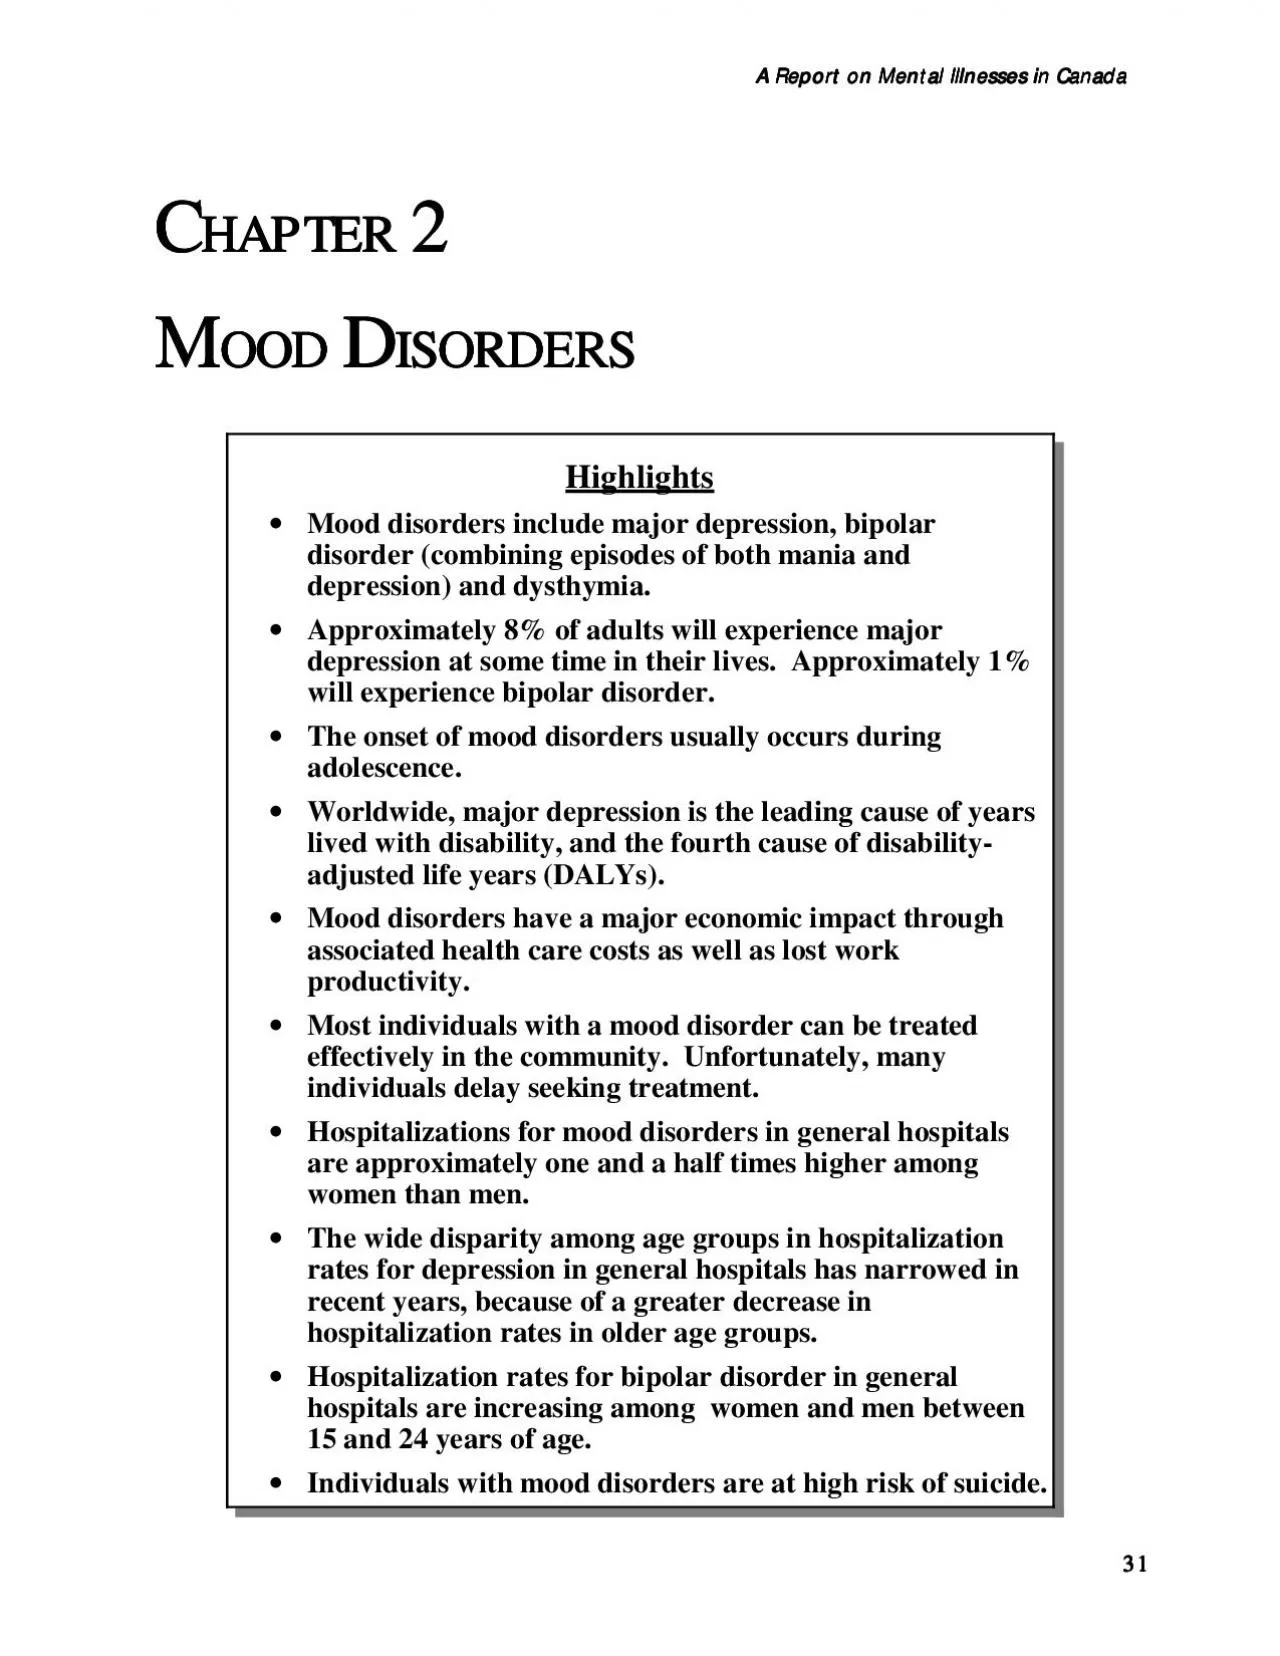 A Report on Mental Illnesses in CanadaA Report on Mental Illnesses in